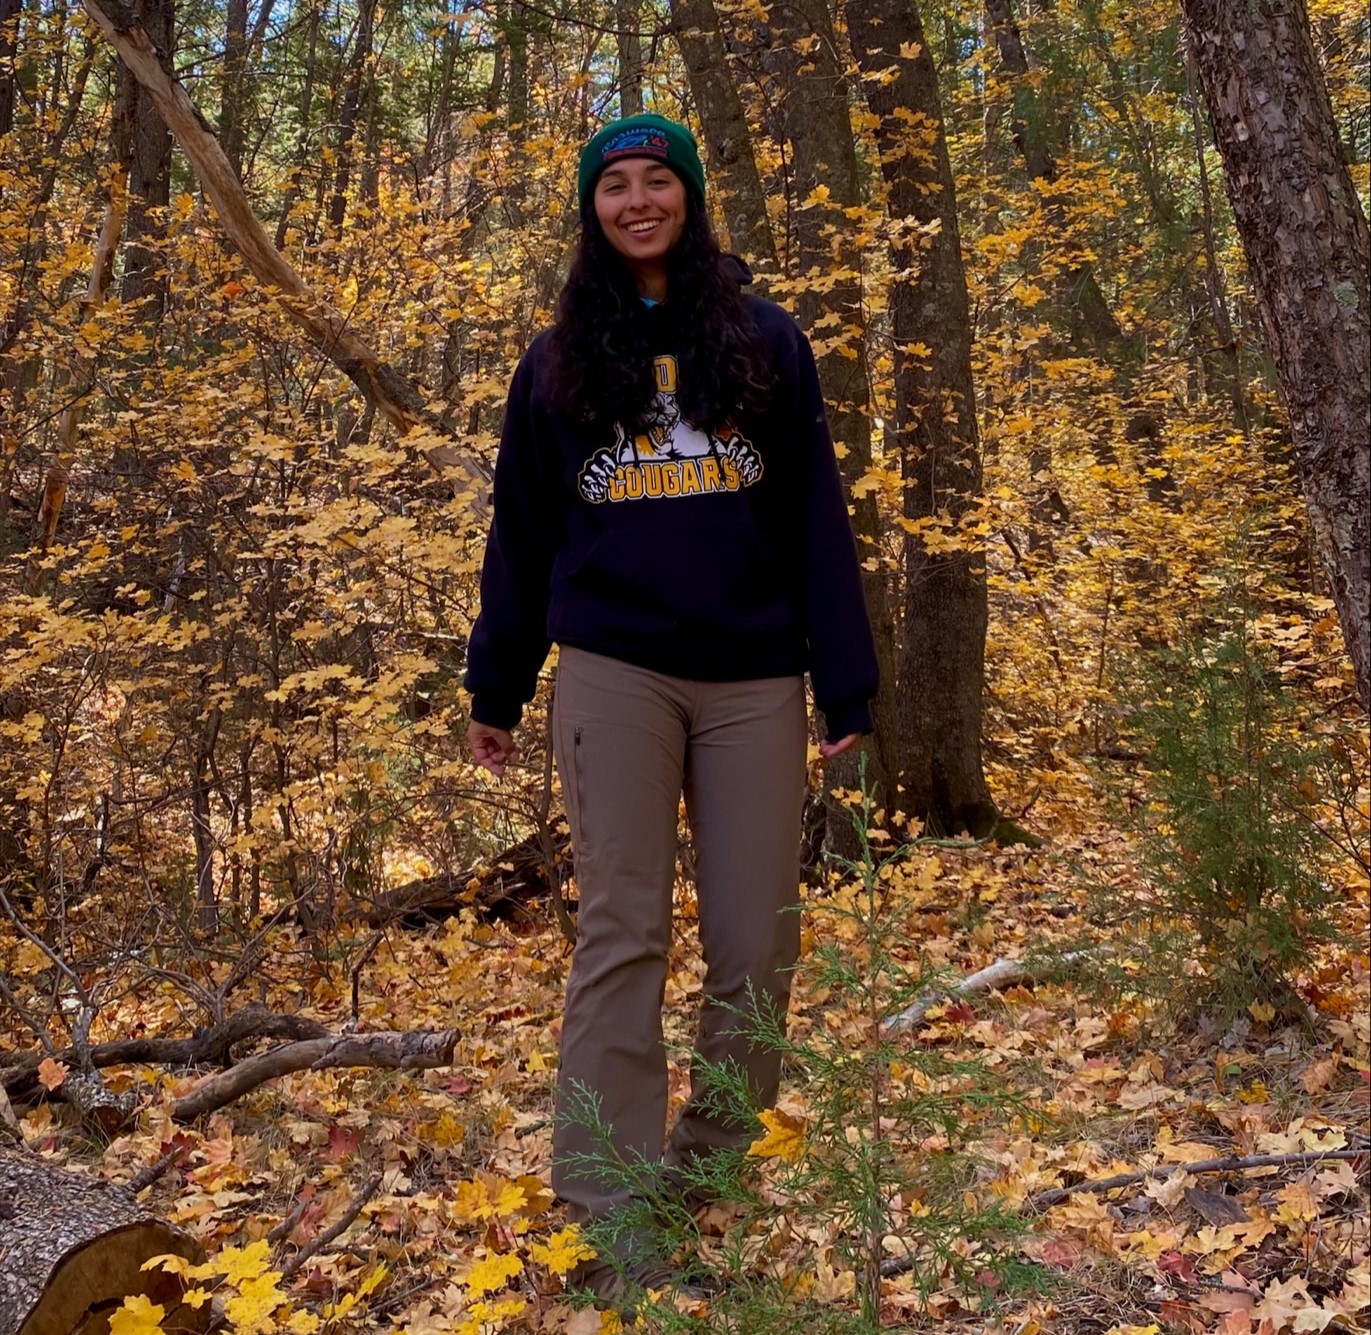 Grace Salmon standing in front of trees with golden leaves. She is wearing a beanie, a black sweatshirt with "Cougars" written on it, and brown pants.